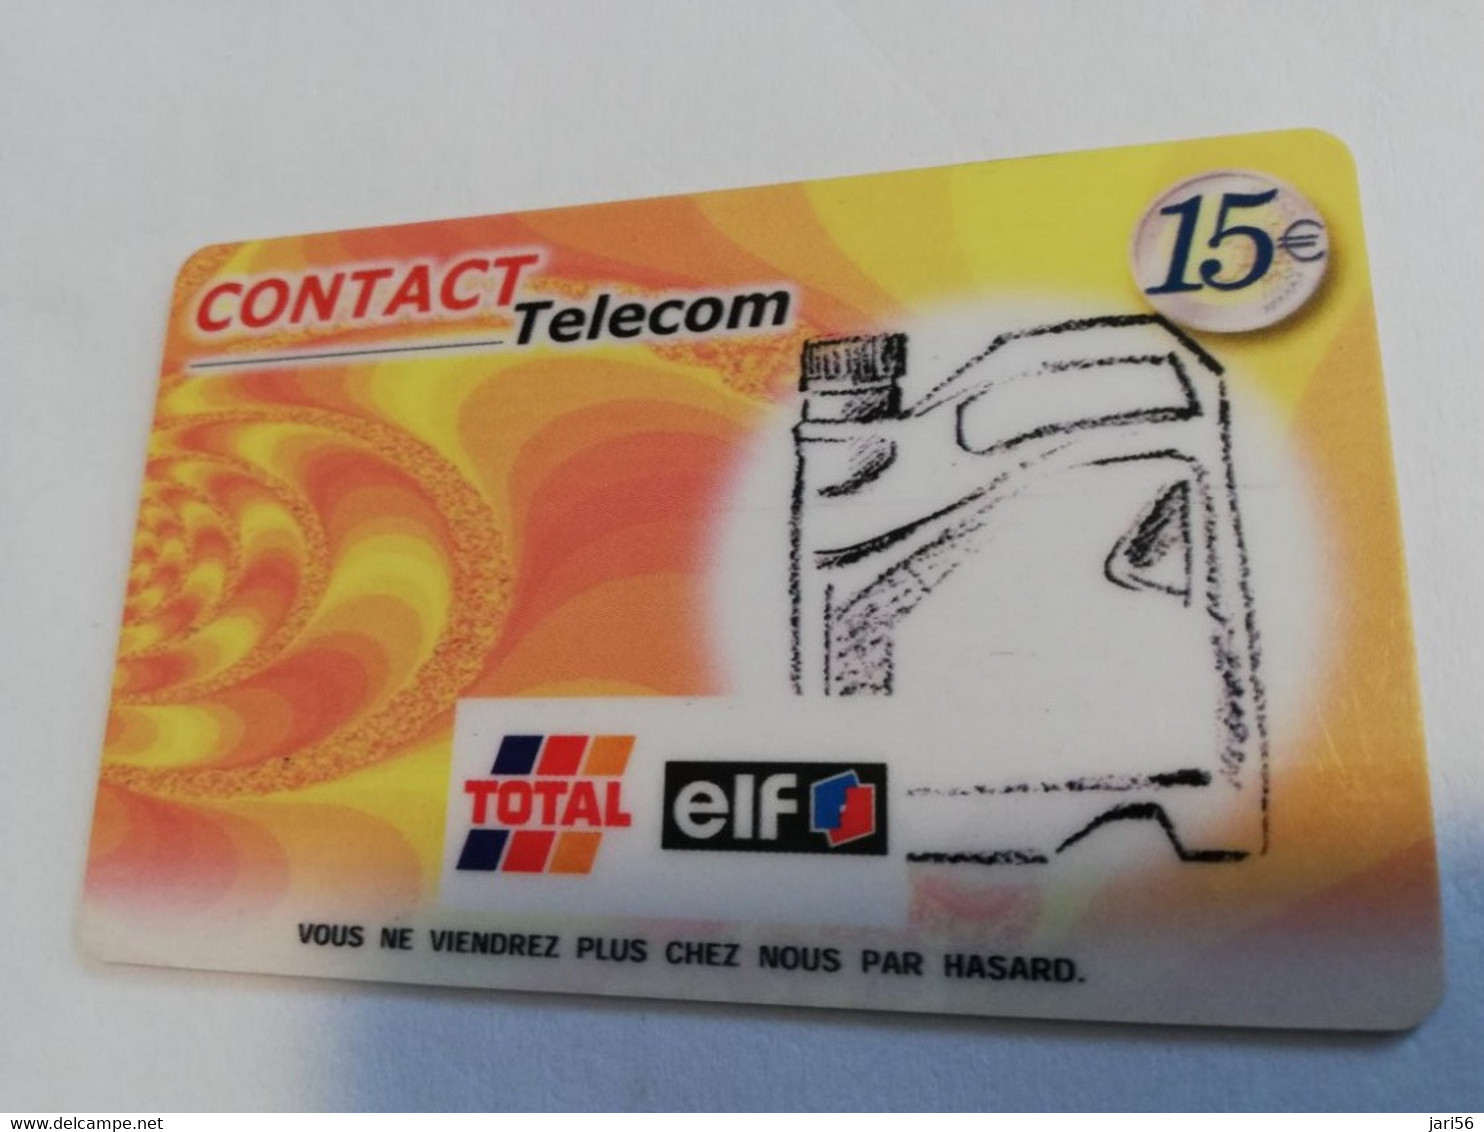 ST MARTIN FRENCH SIDE 3CARDS  SERIE € 5,-+ € 10,-+ € 15,-  GAS STATION TOTAL/ELF   CONTACT TELECOM    **6579 ** - Antillen (Frans)